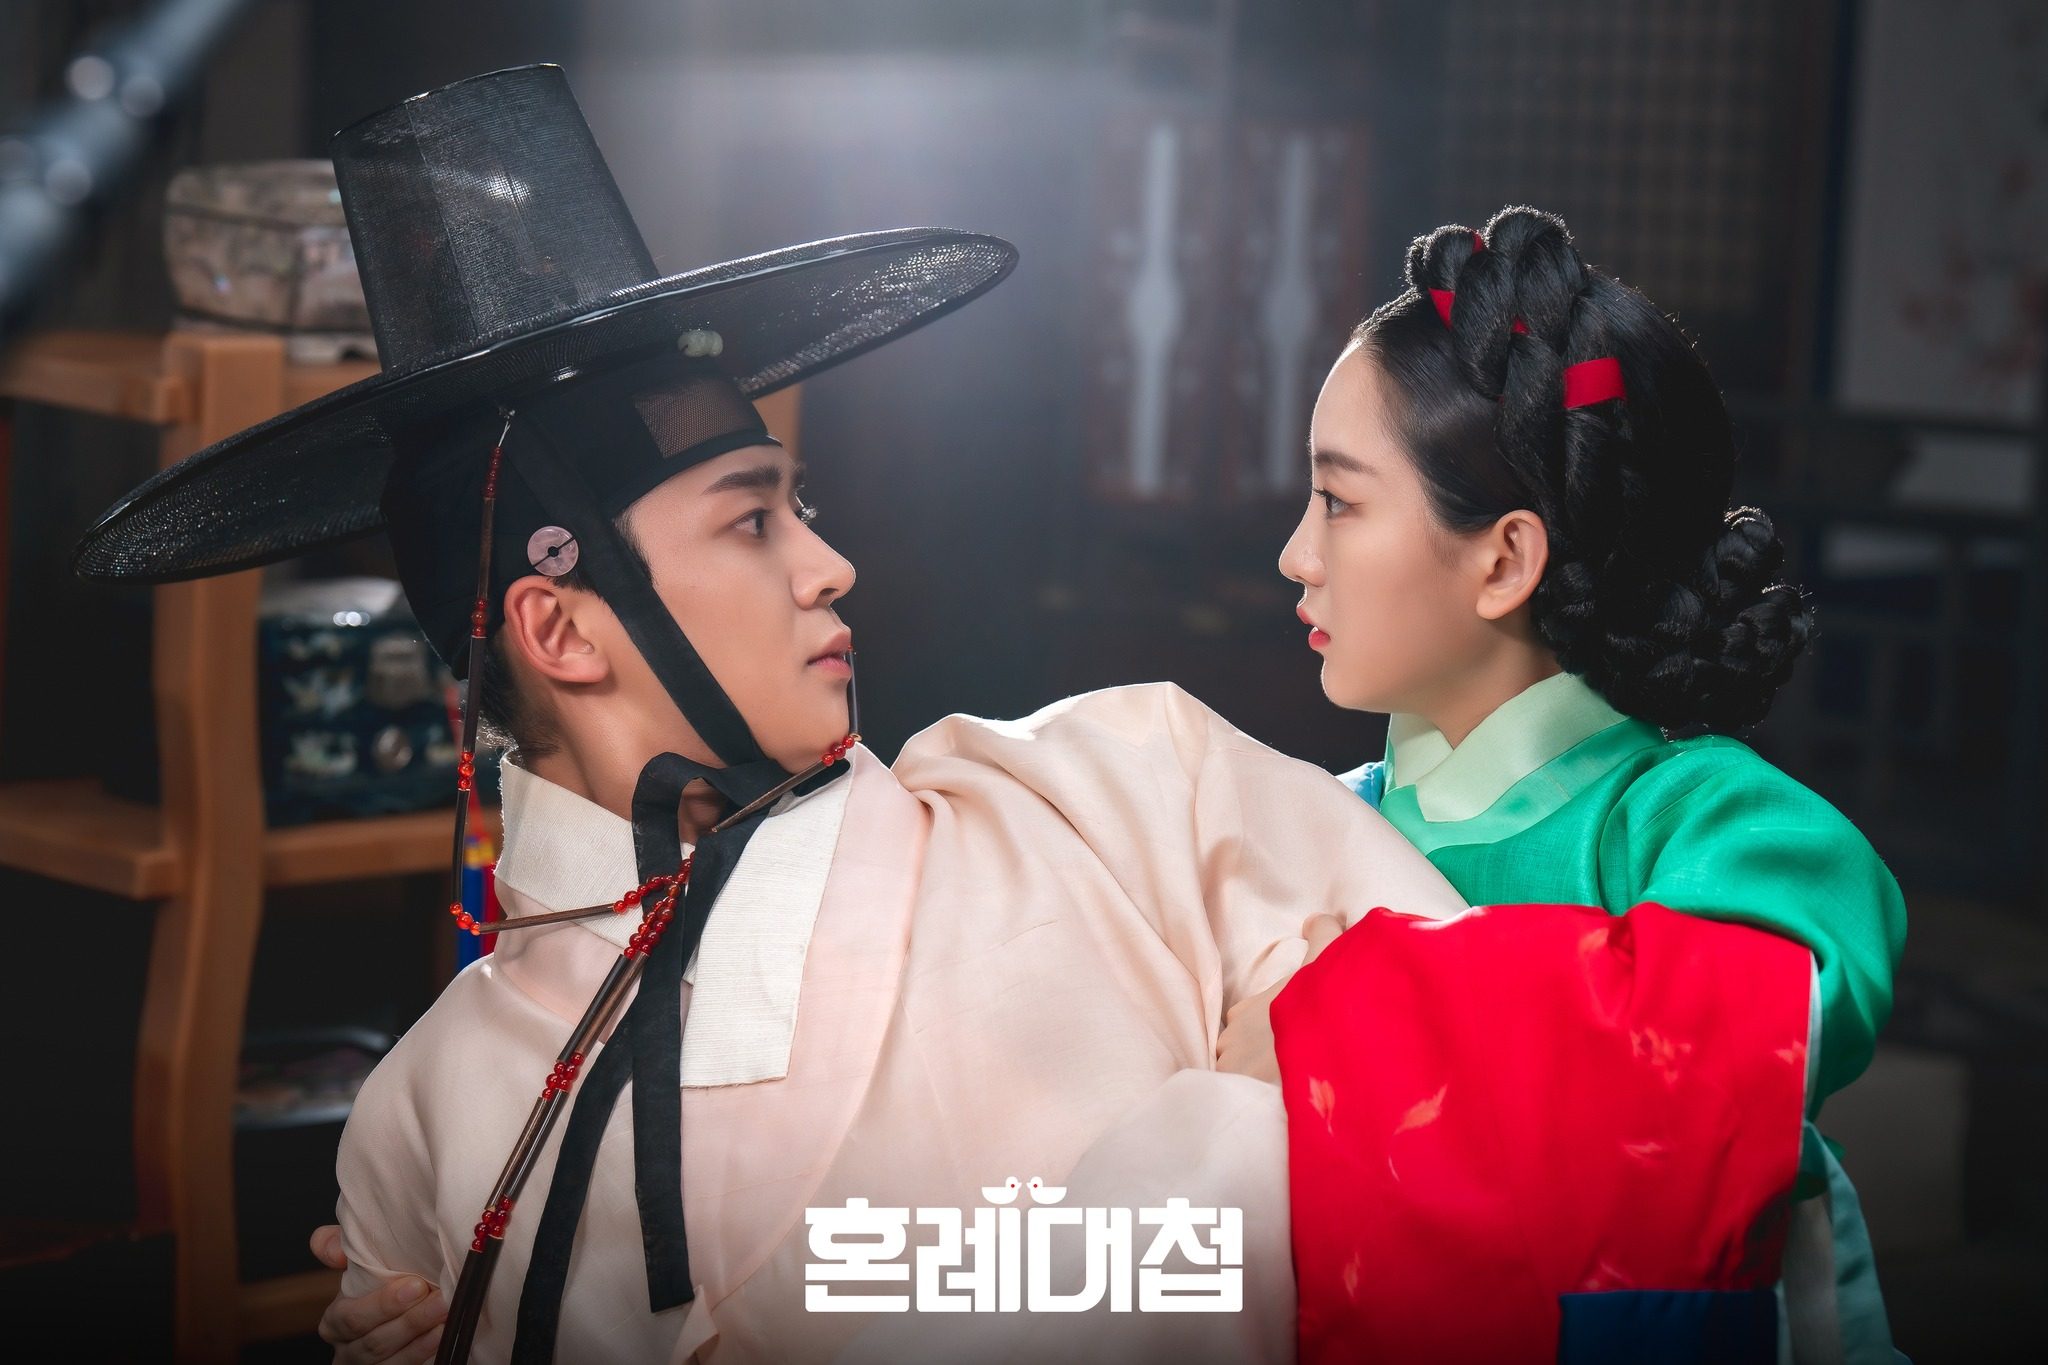 Rowoon (left) and Cho Yi-hyun in a still from “The Matchmakers”.